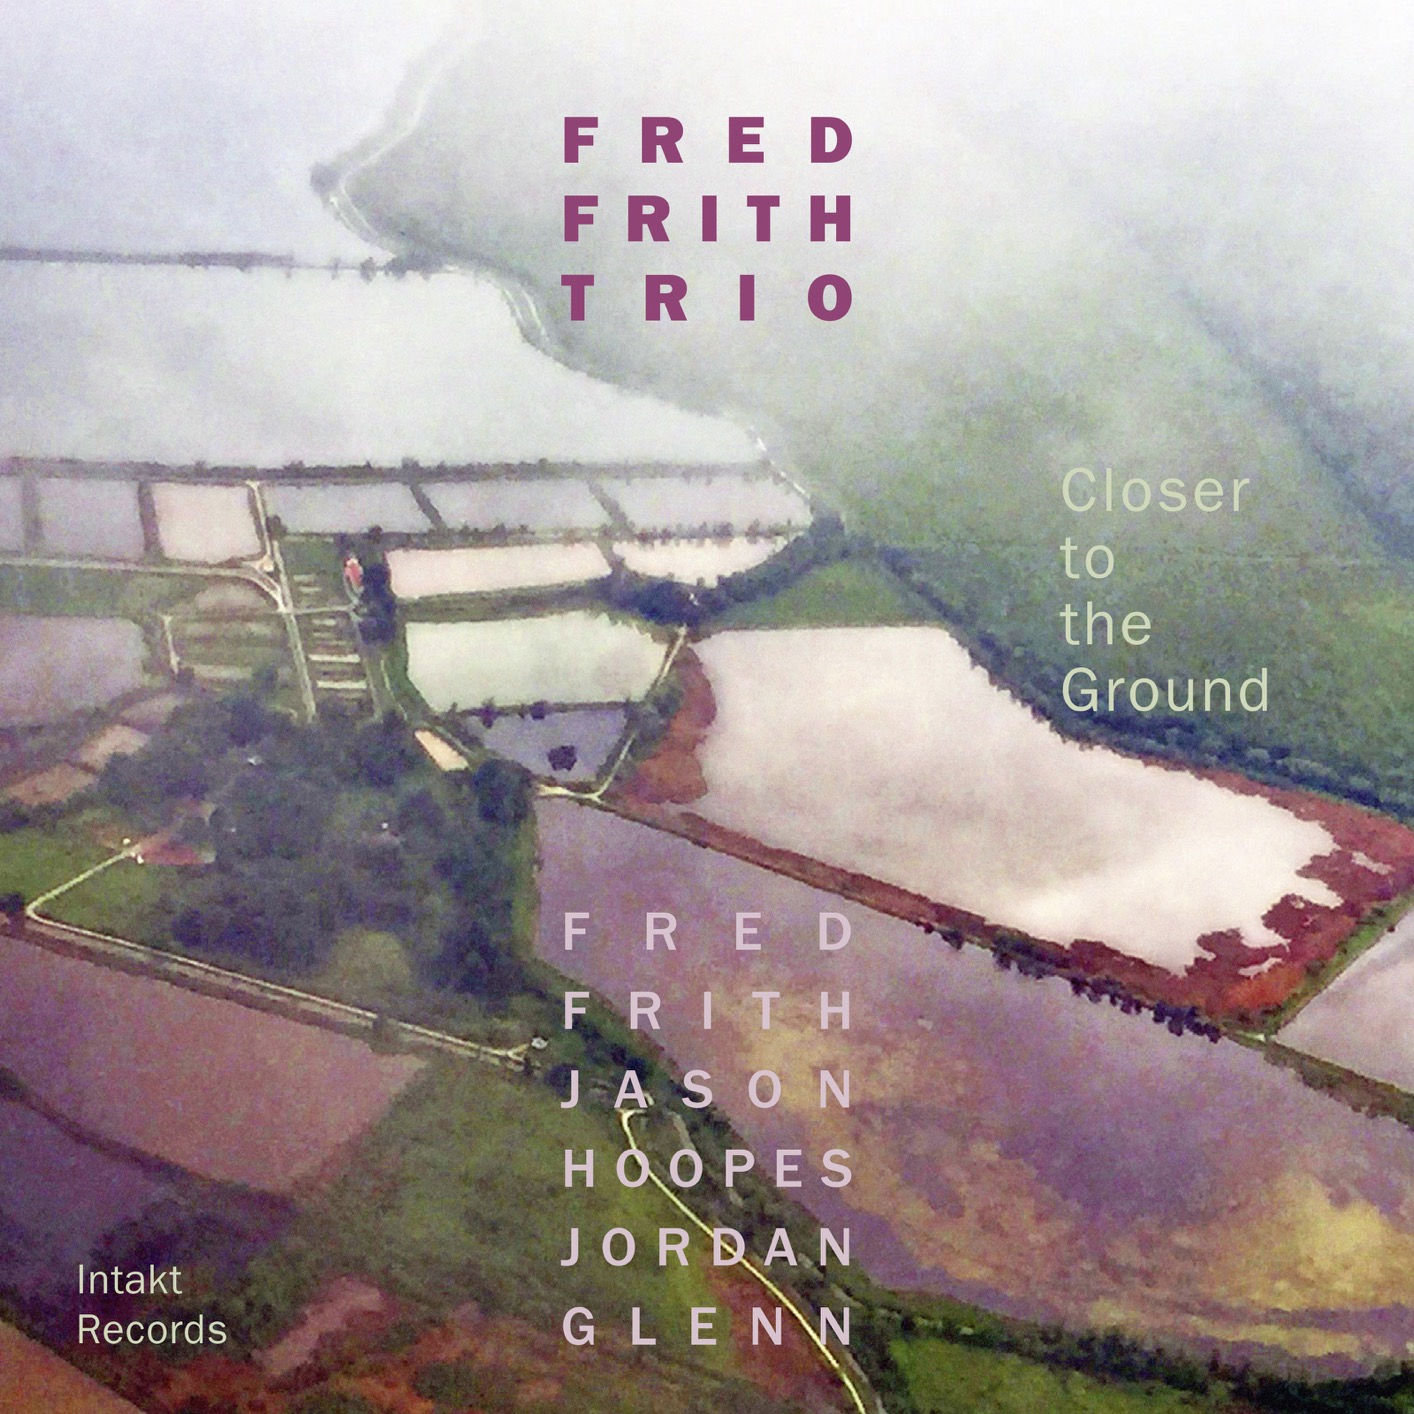 Fred Frith Trio - Closer to the Ground (2018) [FLAC 24bit/44,1kHz]